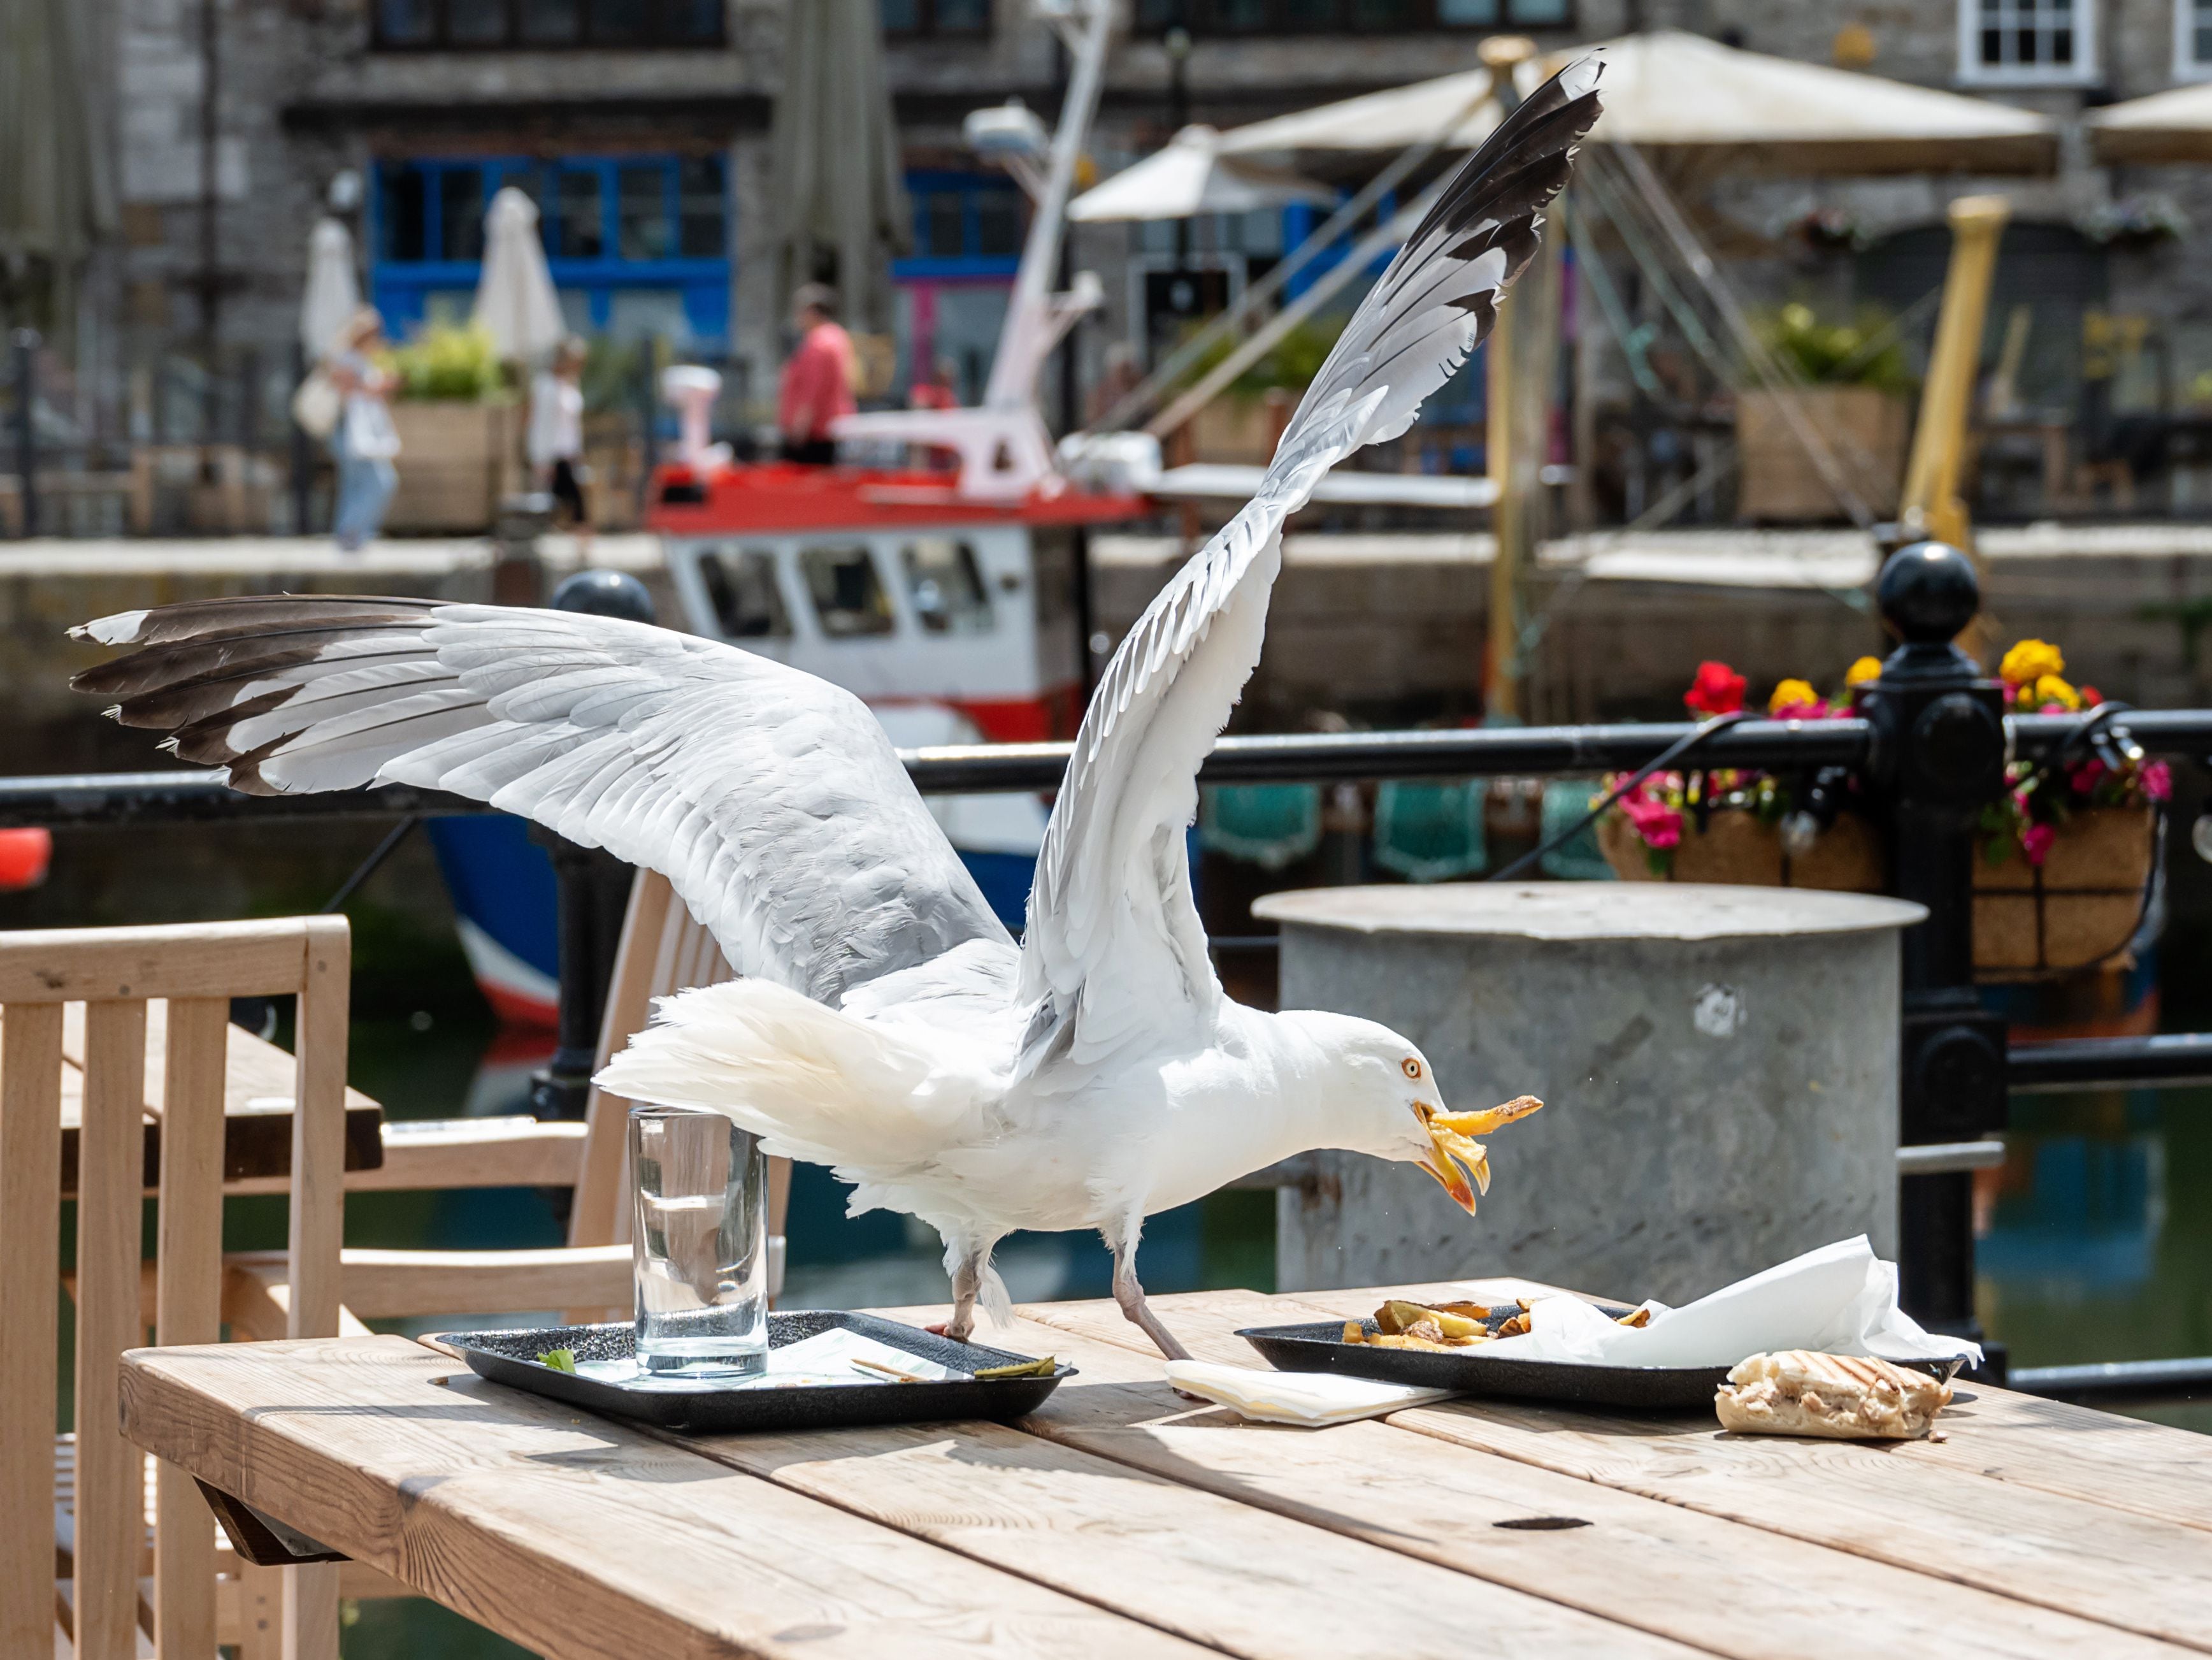 'Don't kill seagulls' police urge after reports of shootings near tourist hotspots